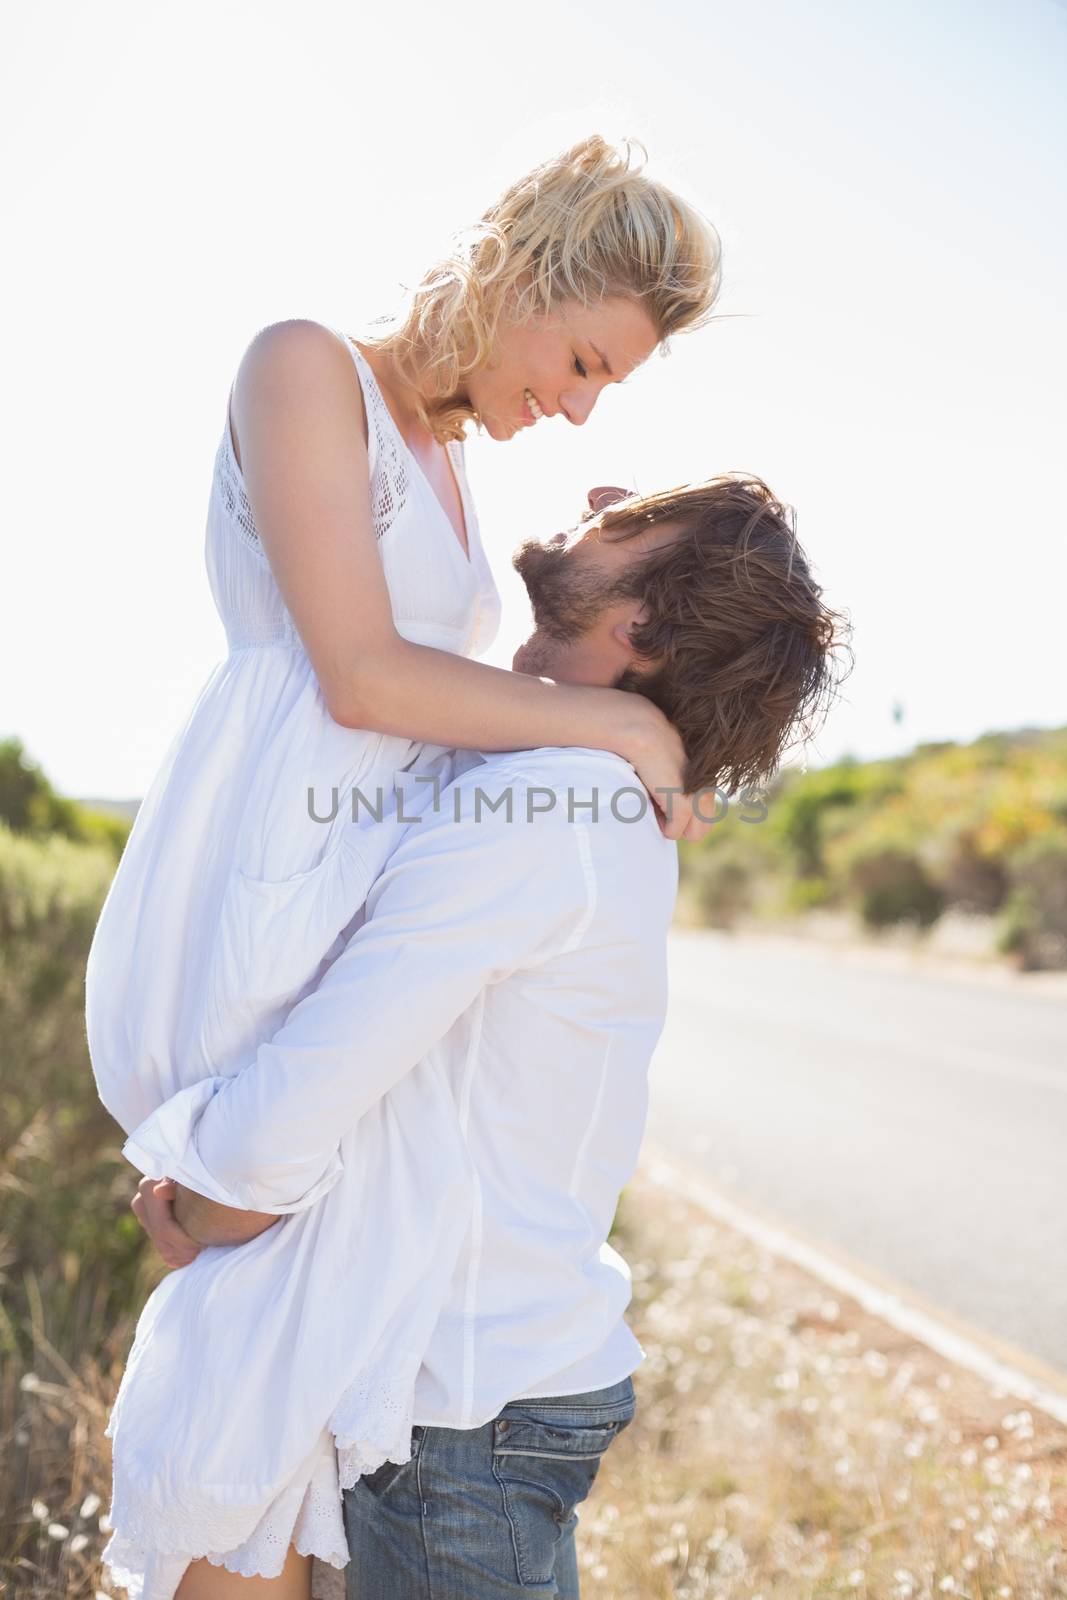 Attractive man lifting up his girlfriend on a sunny day